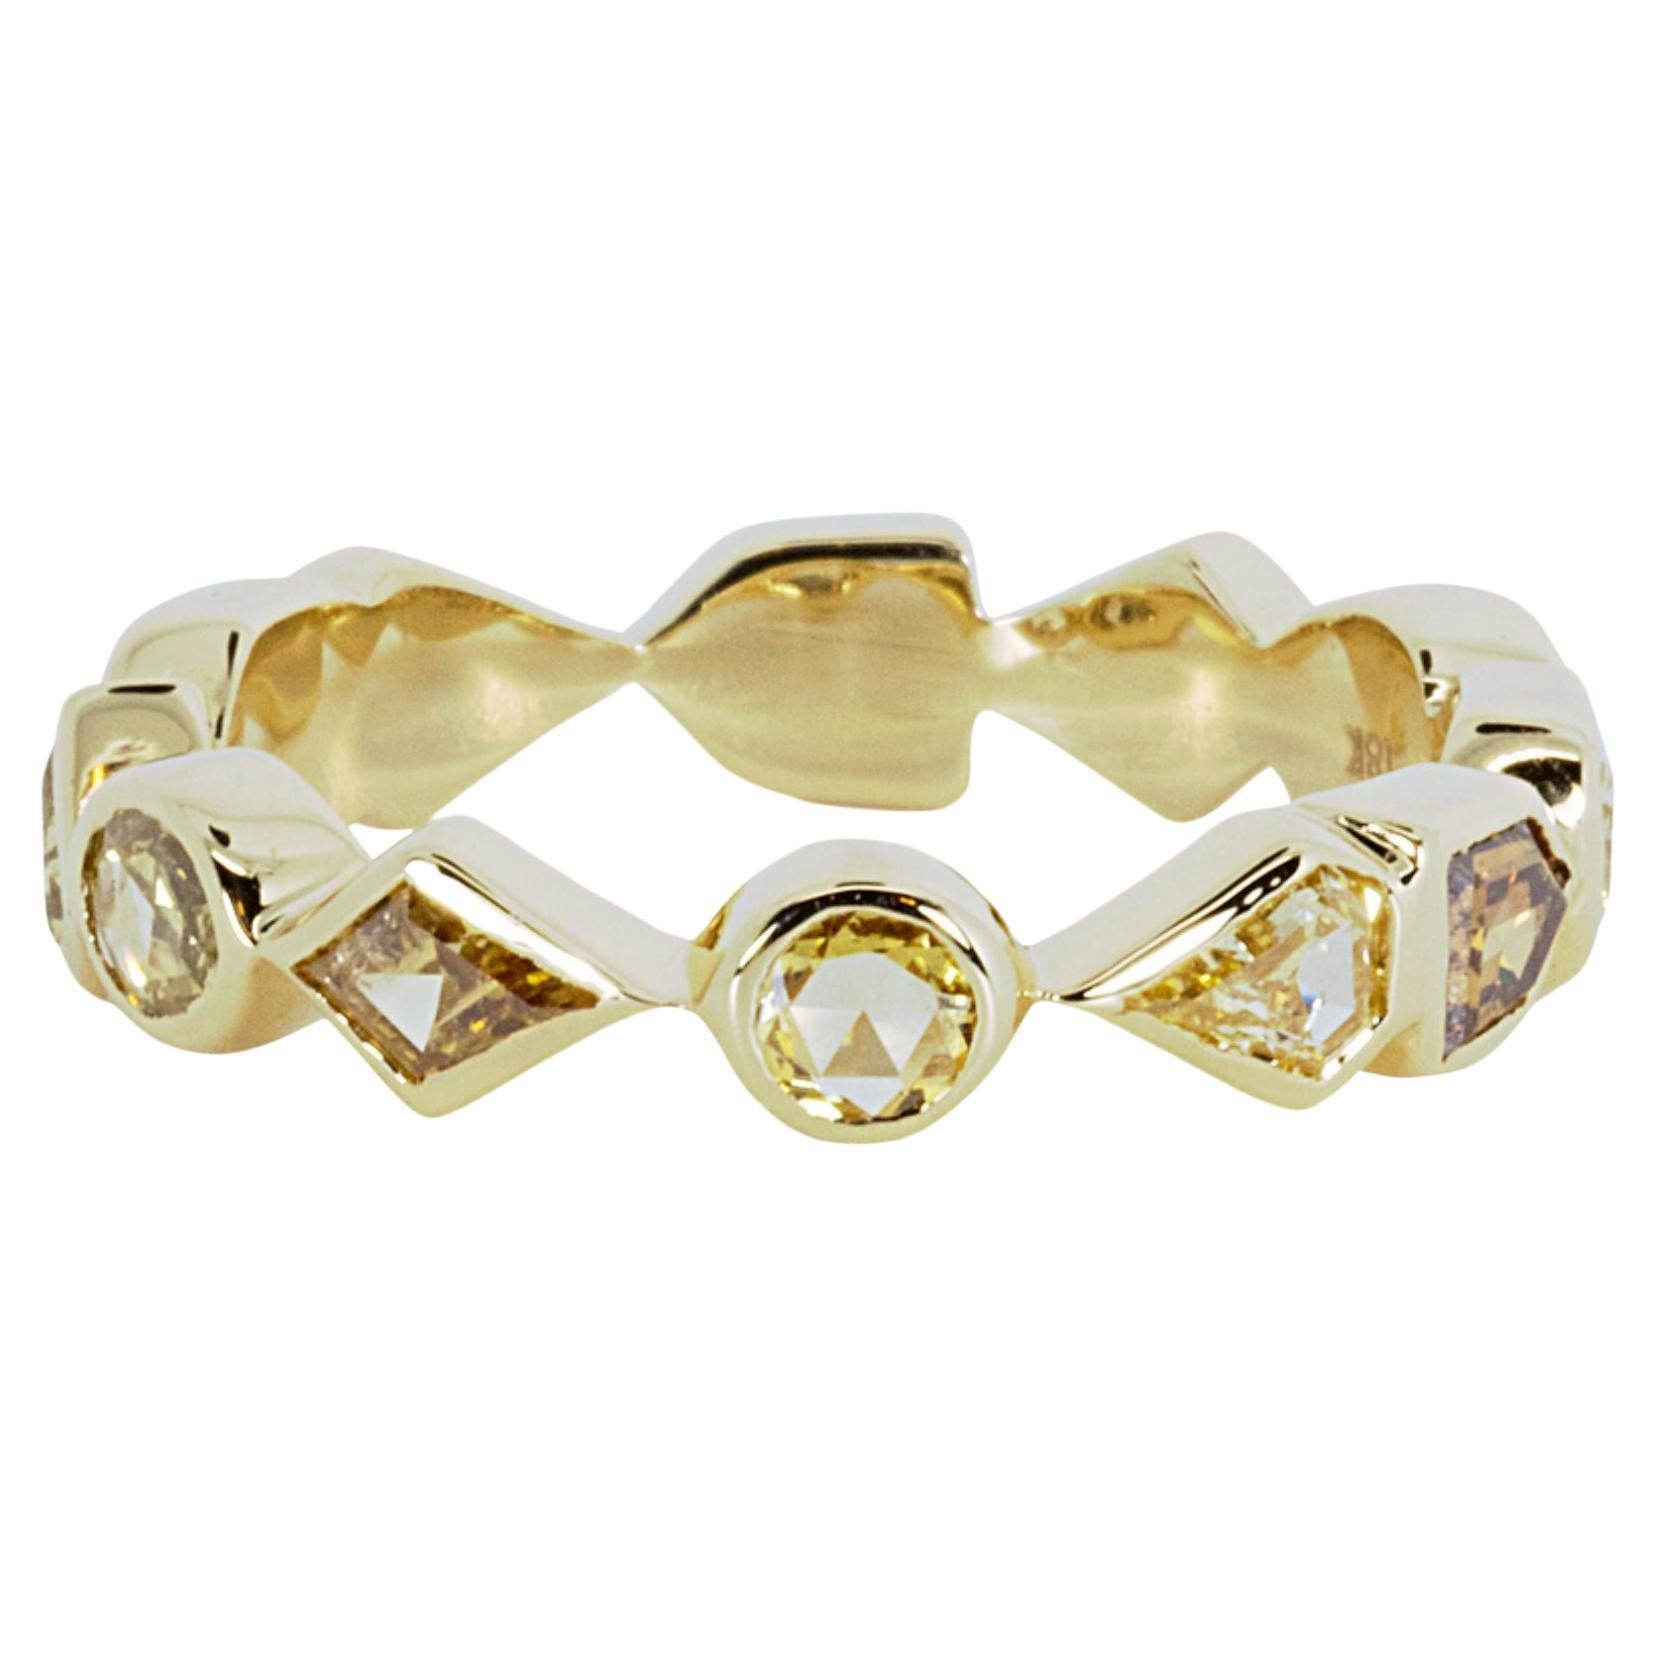 Exquisite 18k Yellow Gold Colored Diamond Ring